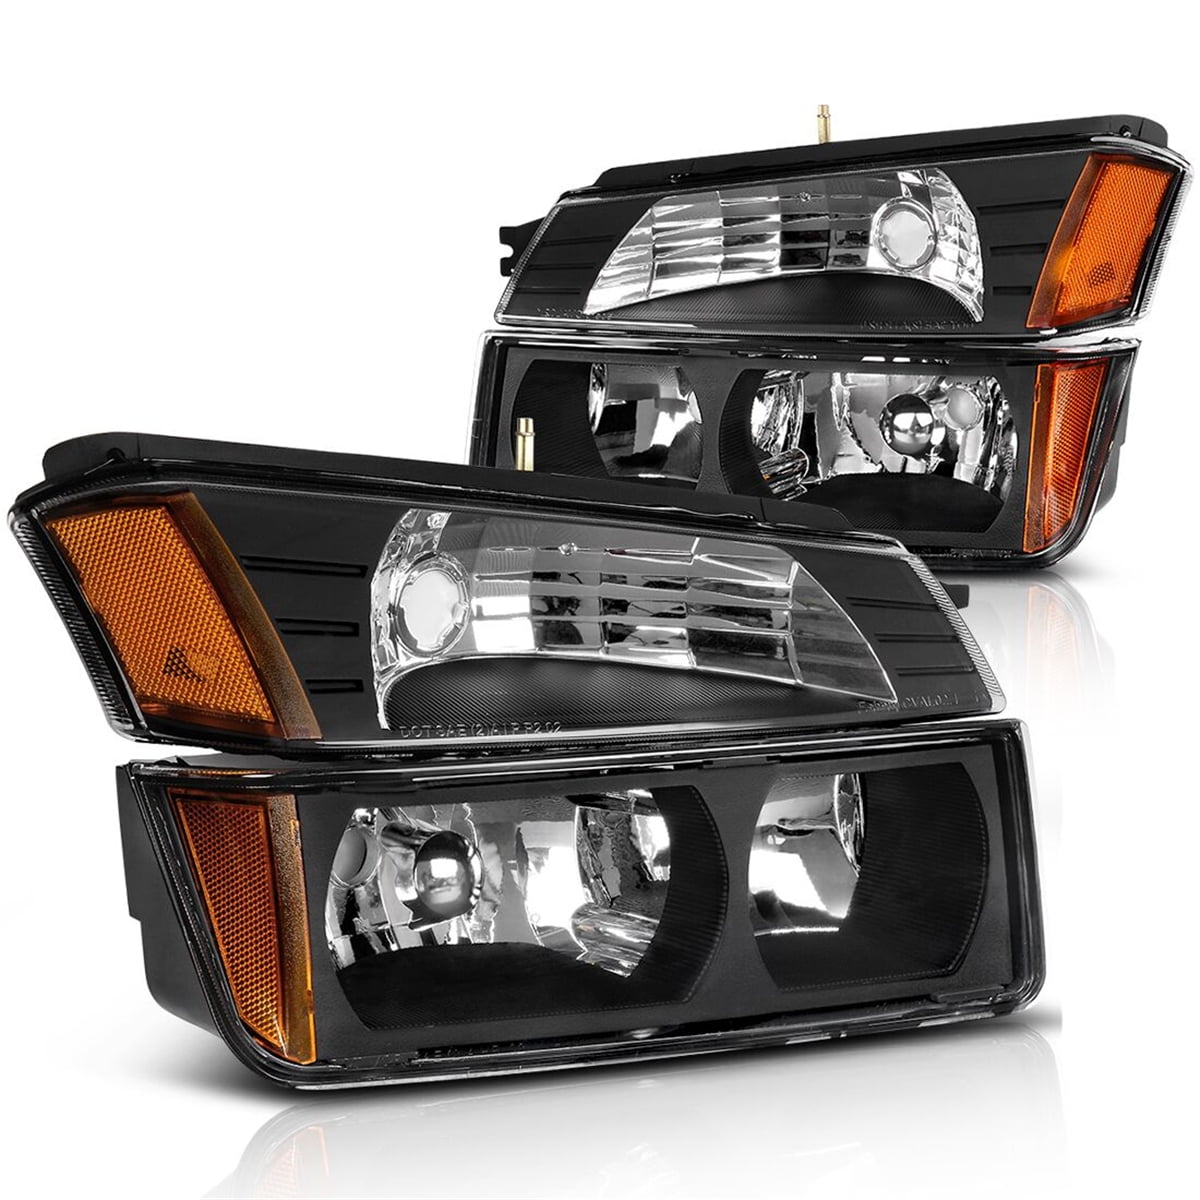 Headlight Assembly for 2002-2006 Chevy Avalanche with BODY CLADDING,Chrome Housing Amber Refletor with Signal Lights 